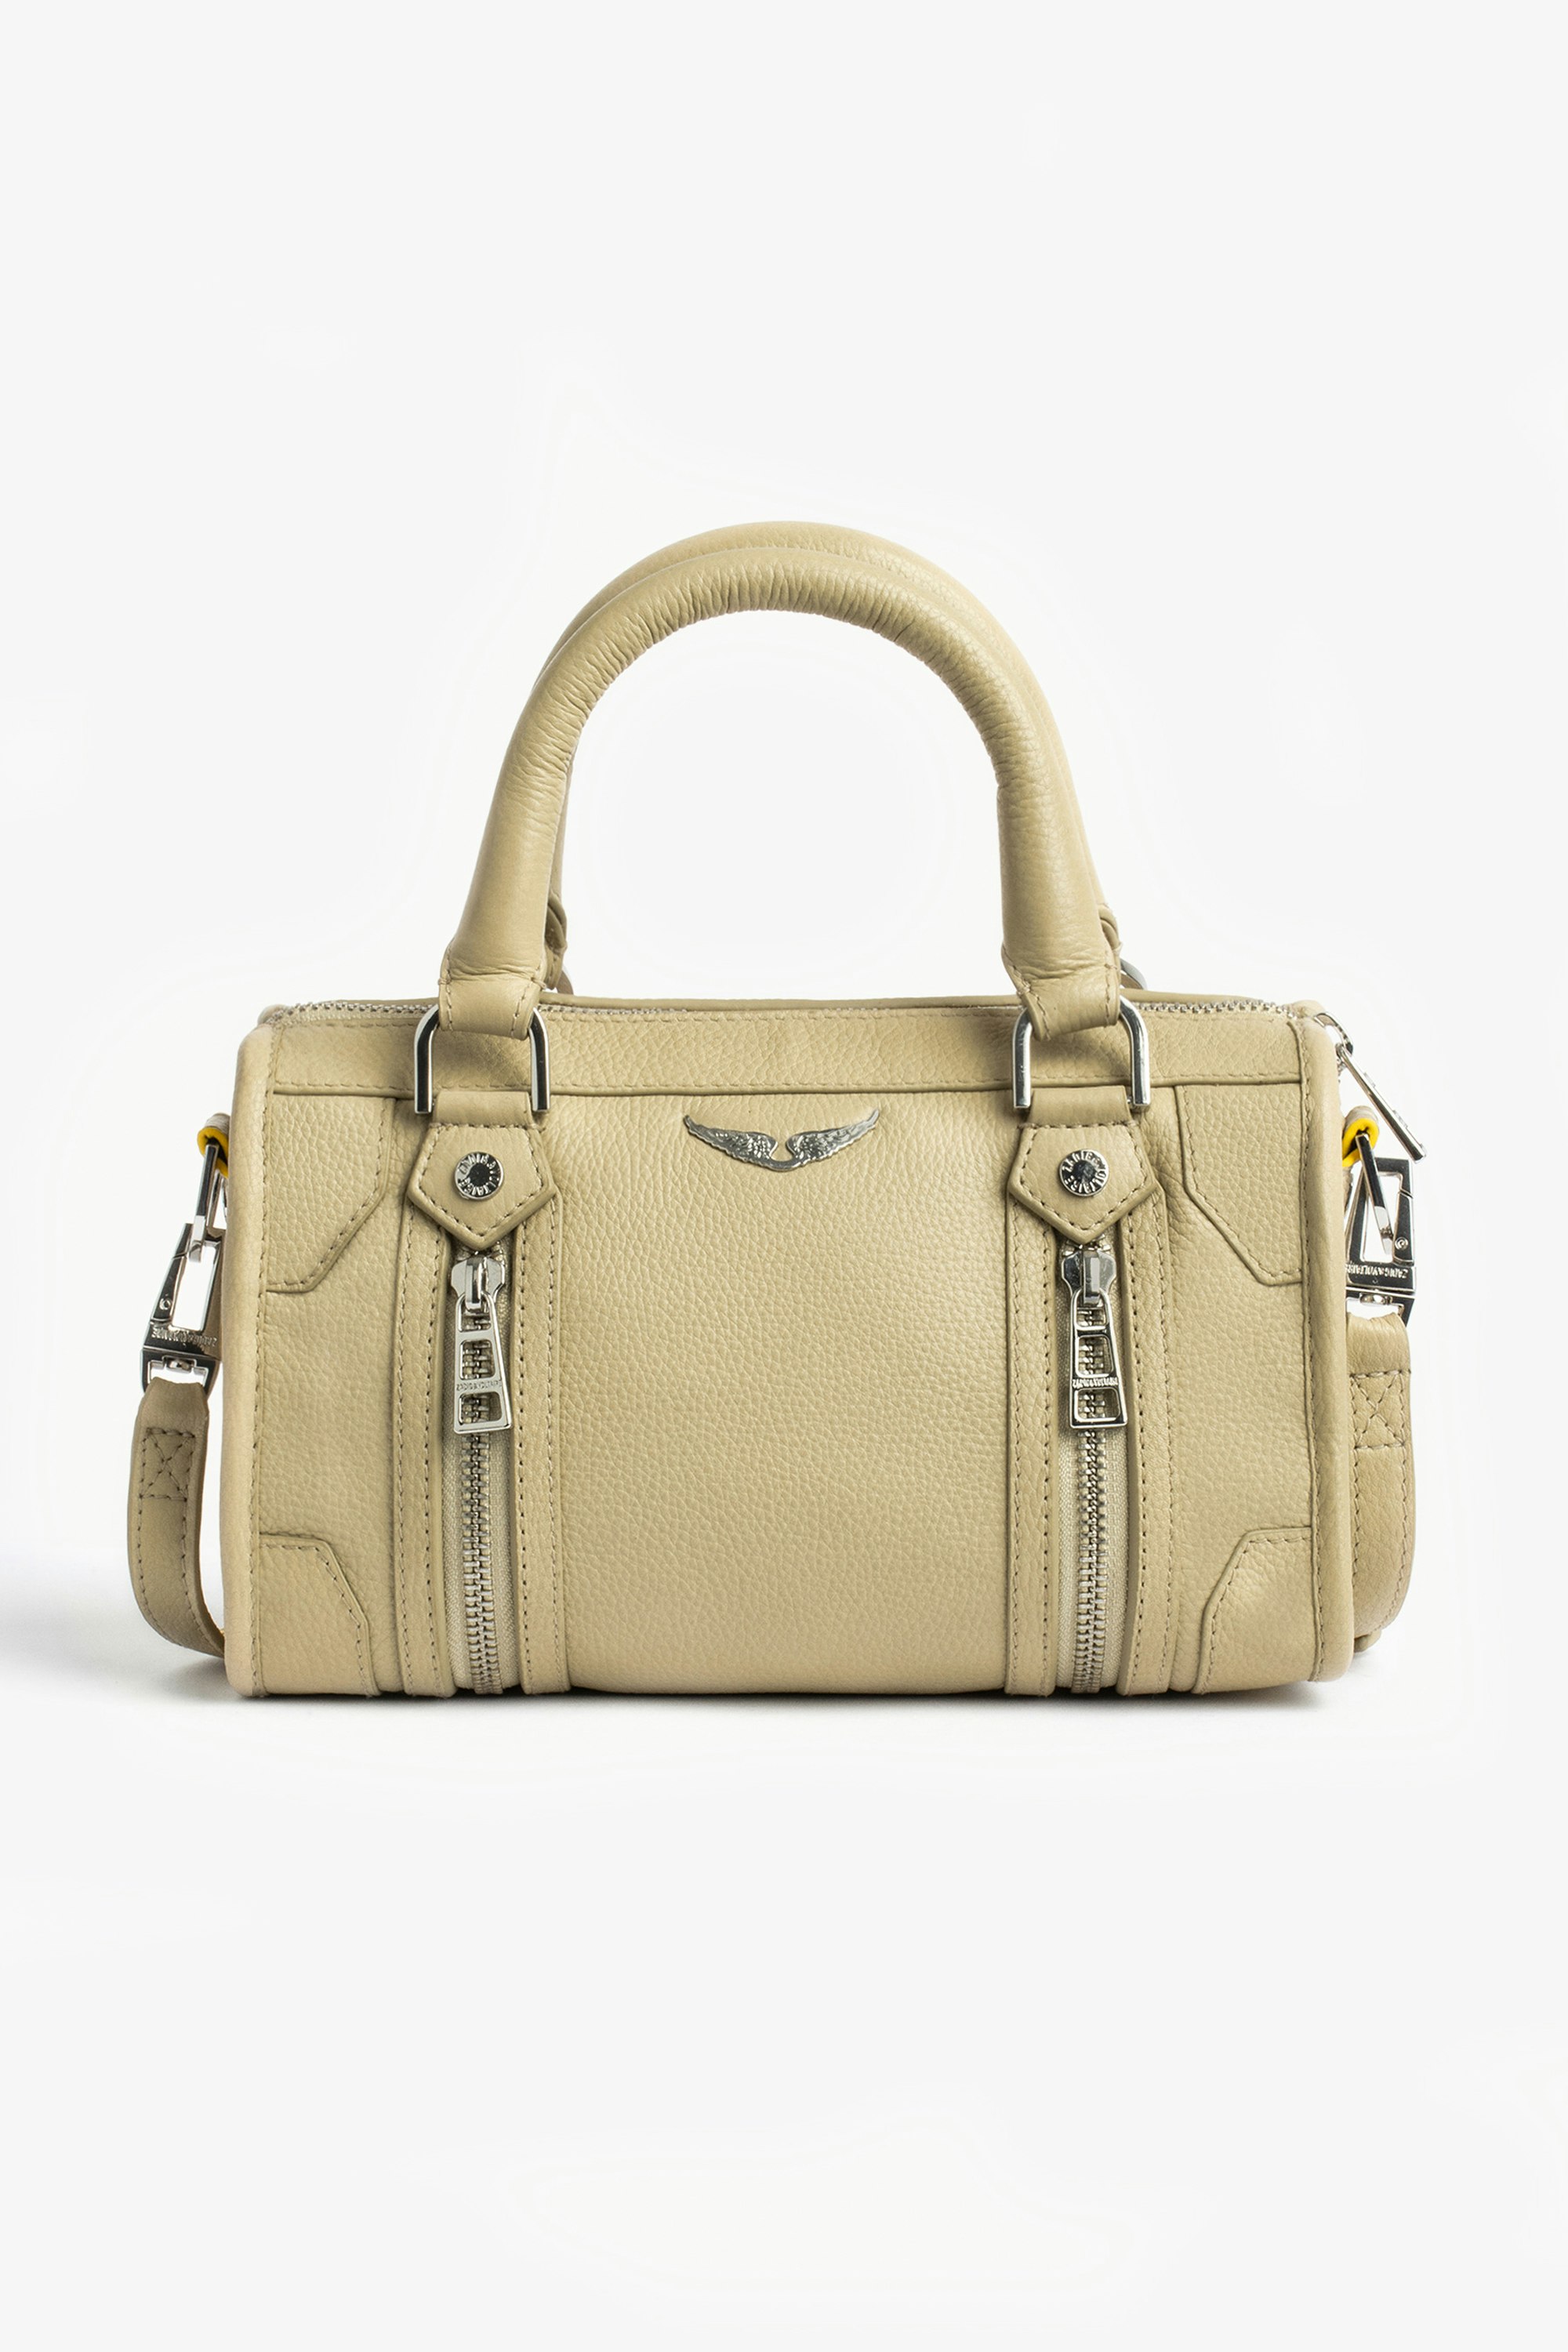 XS Sunny #2 バッグ Women’s small zipped bag in beige leather with a shoulder strap